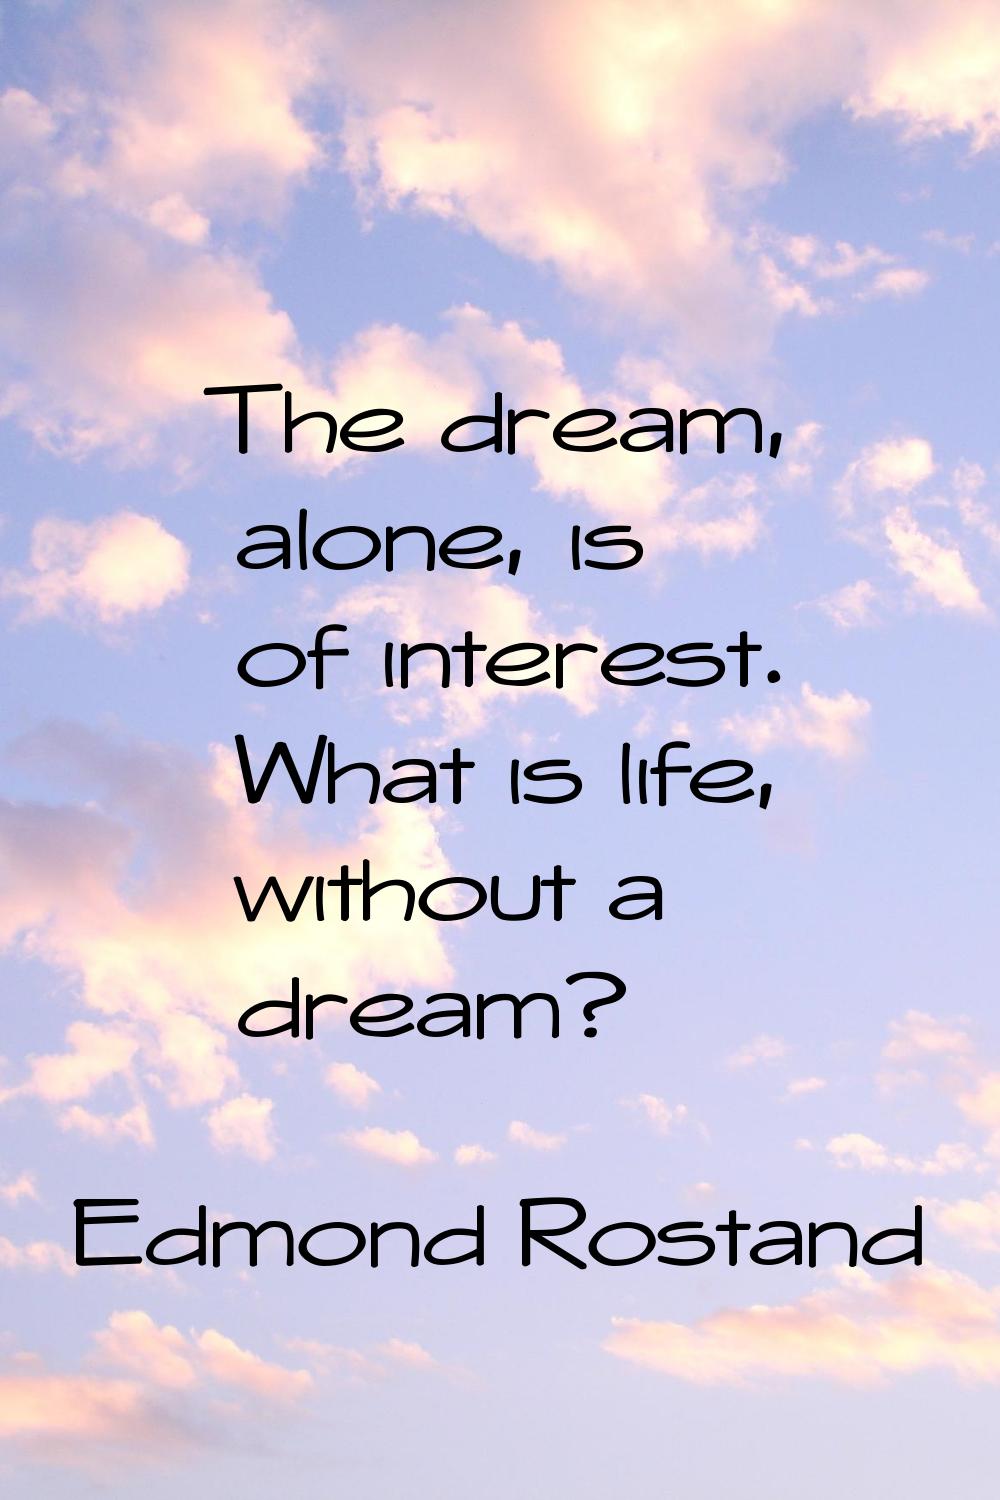 The dream, alone, is of interest. What is life, without a dream?